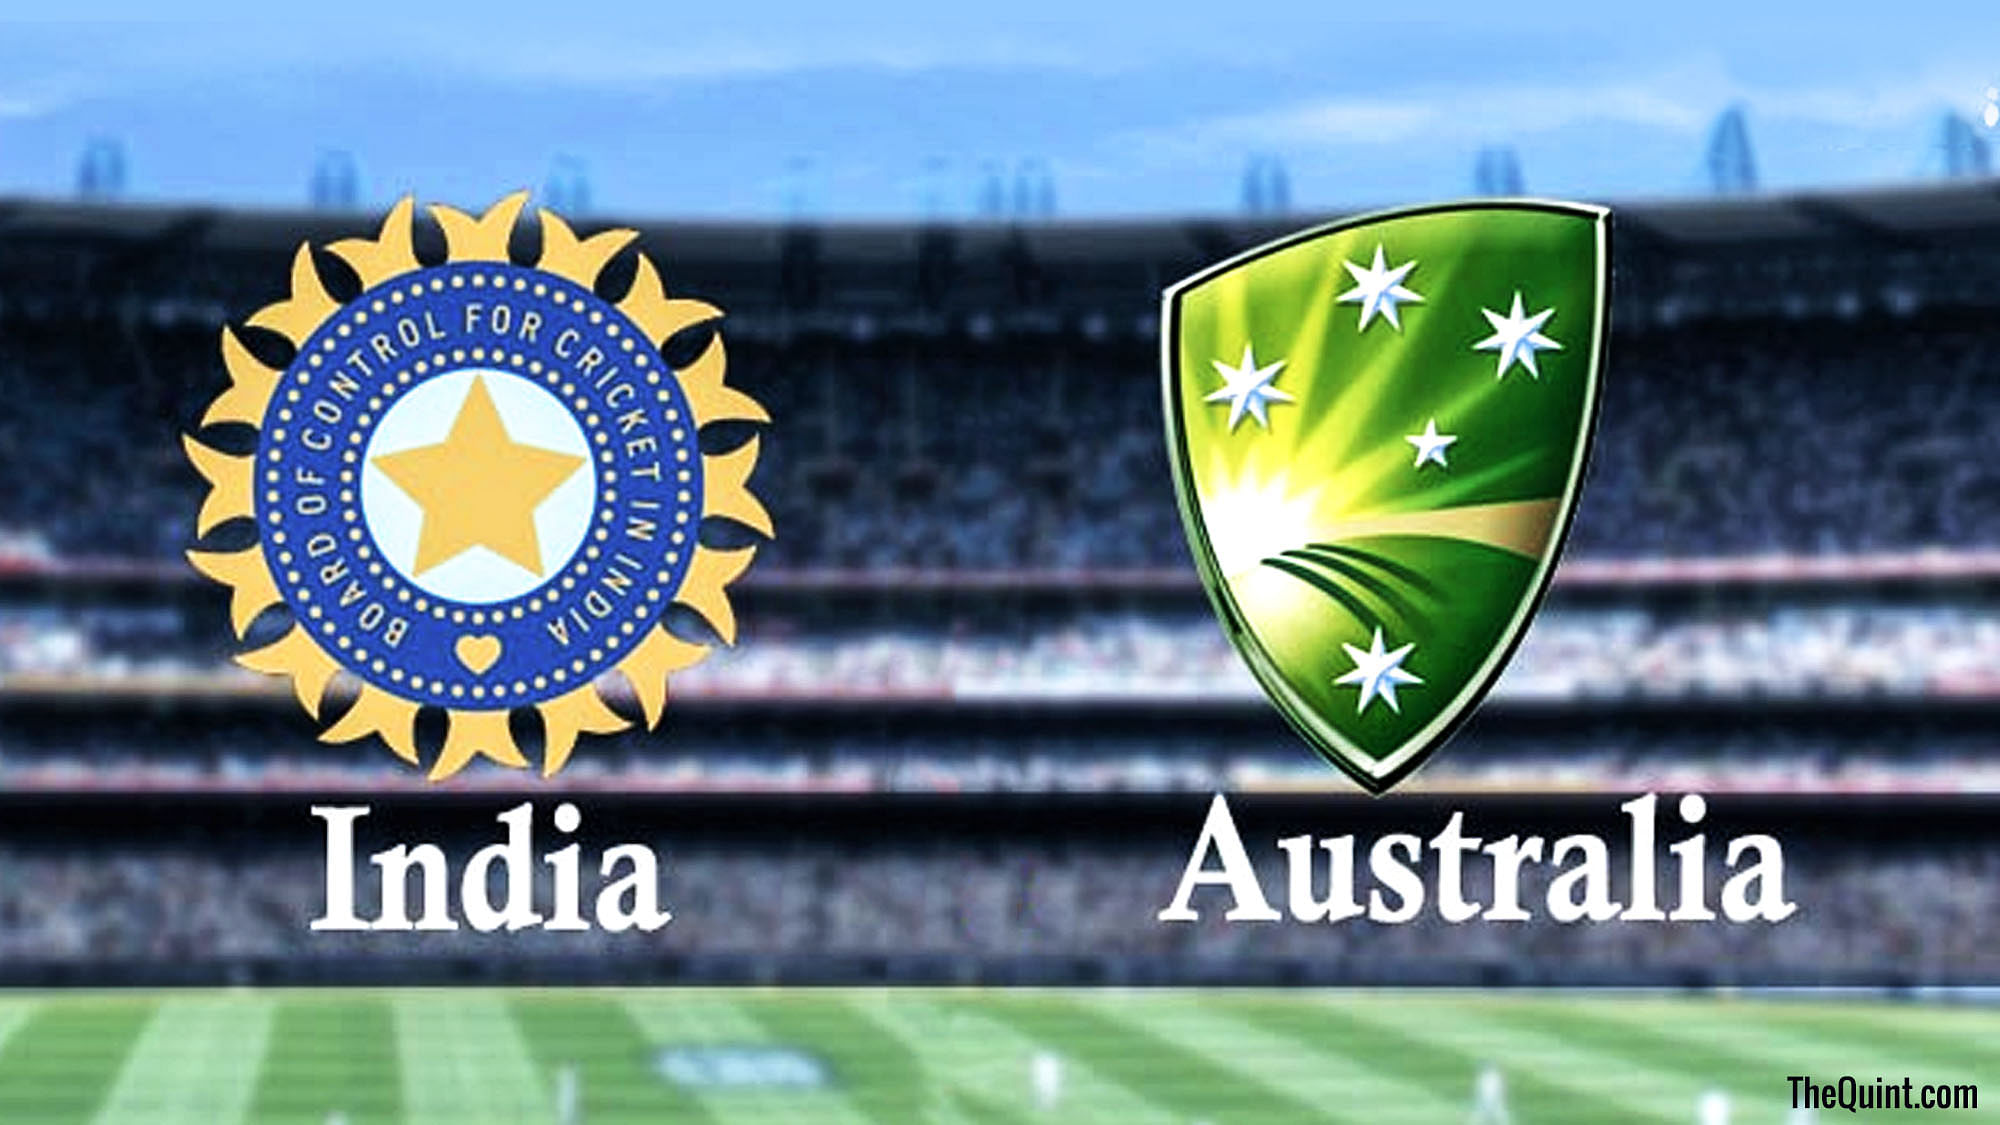 India vs Australia, Ind vs Aus 3rd ODI LIVE Cricket Score Ball by Ball, IND vs AUS Playing 11 Dream11 Cricket Match Streaming Today Online Updates India Win!